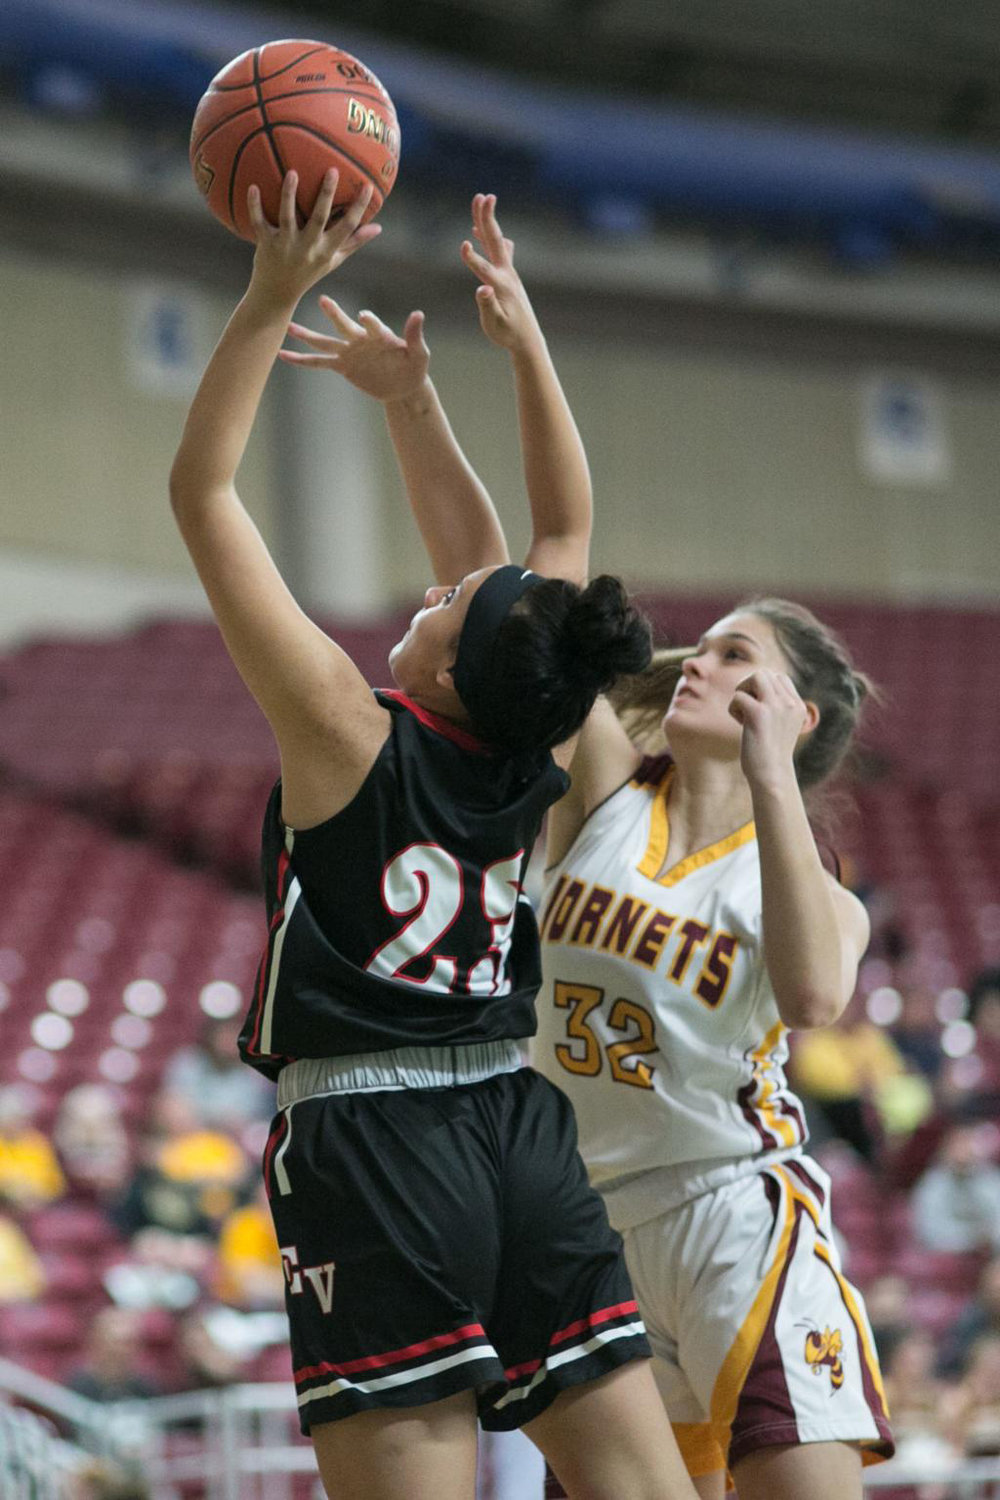 Sam Fiedler (32) defends an East Valley (Yakima) player during the Class 2A girls state basketball tournament in March. Fiedler pulled down five rebounds in the season-ending loss.